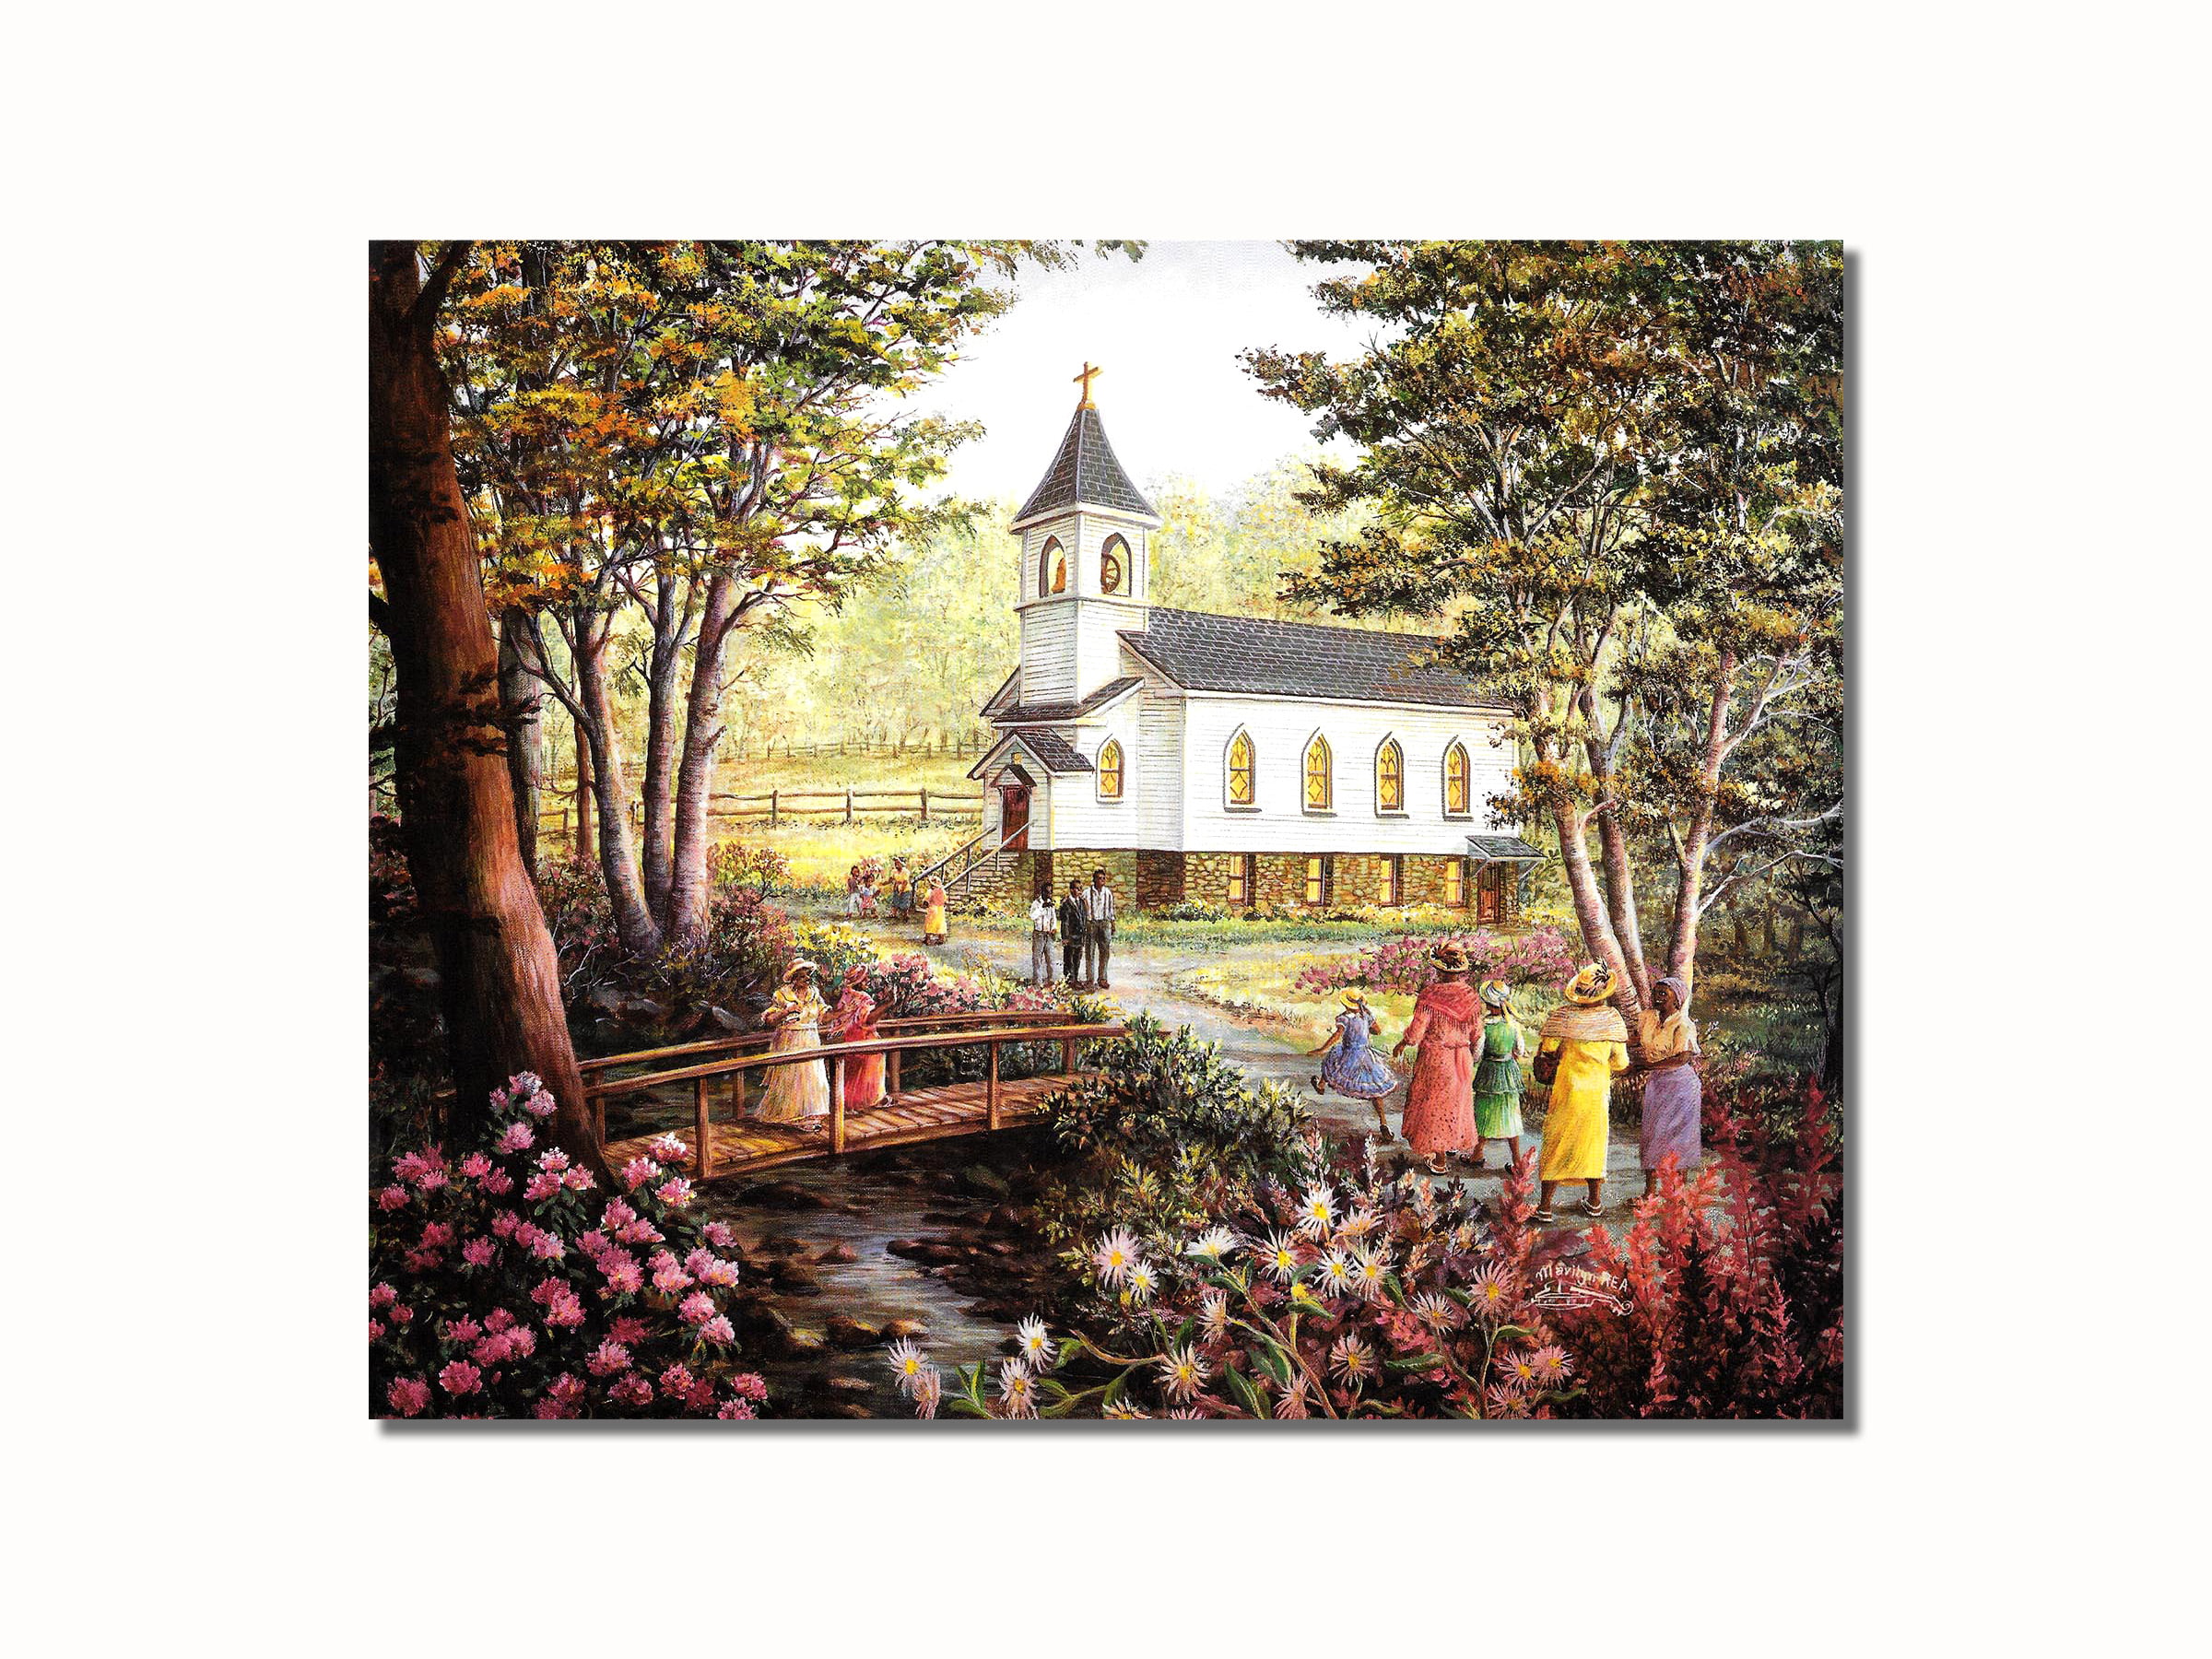 Black Church Funeral by Cotton Field Wall Picture 8x10 Art Print 